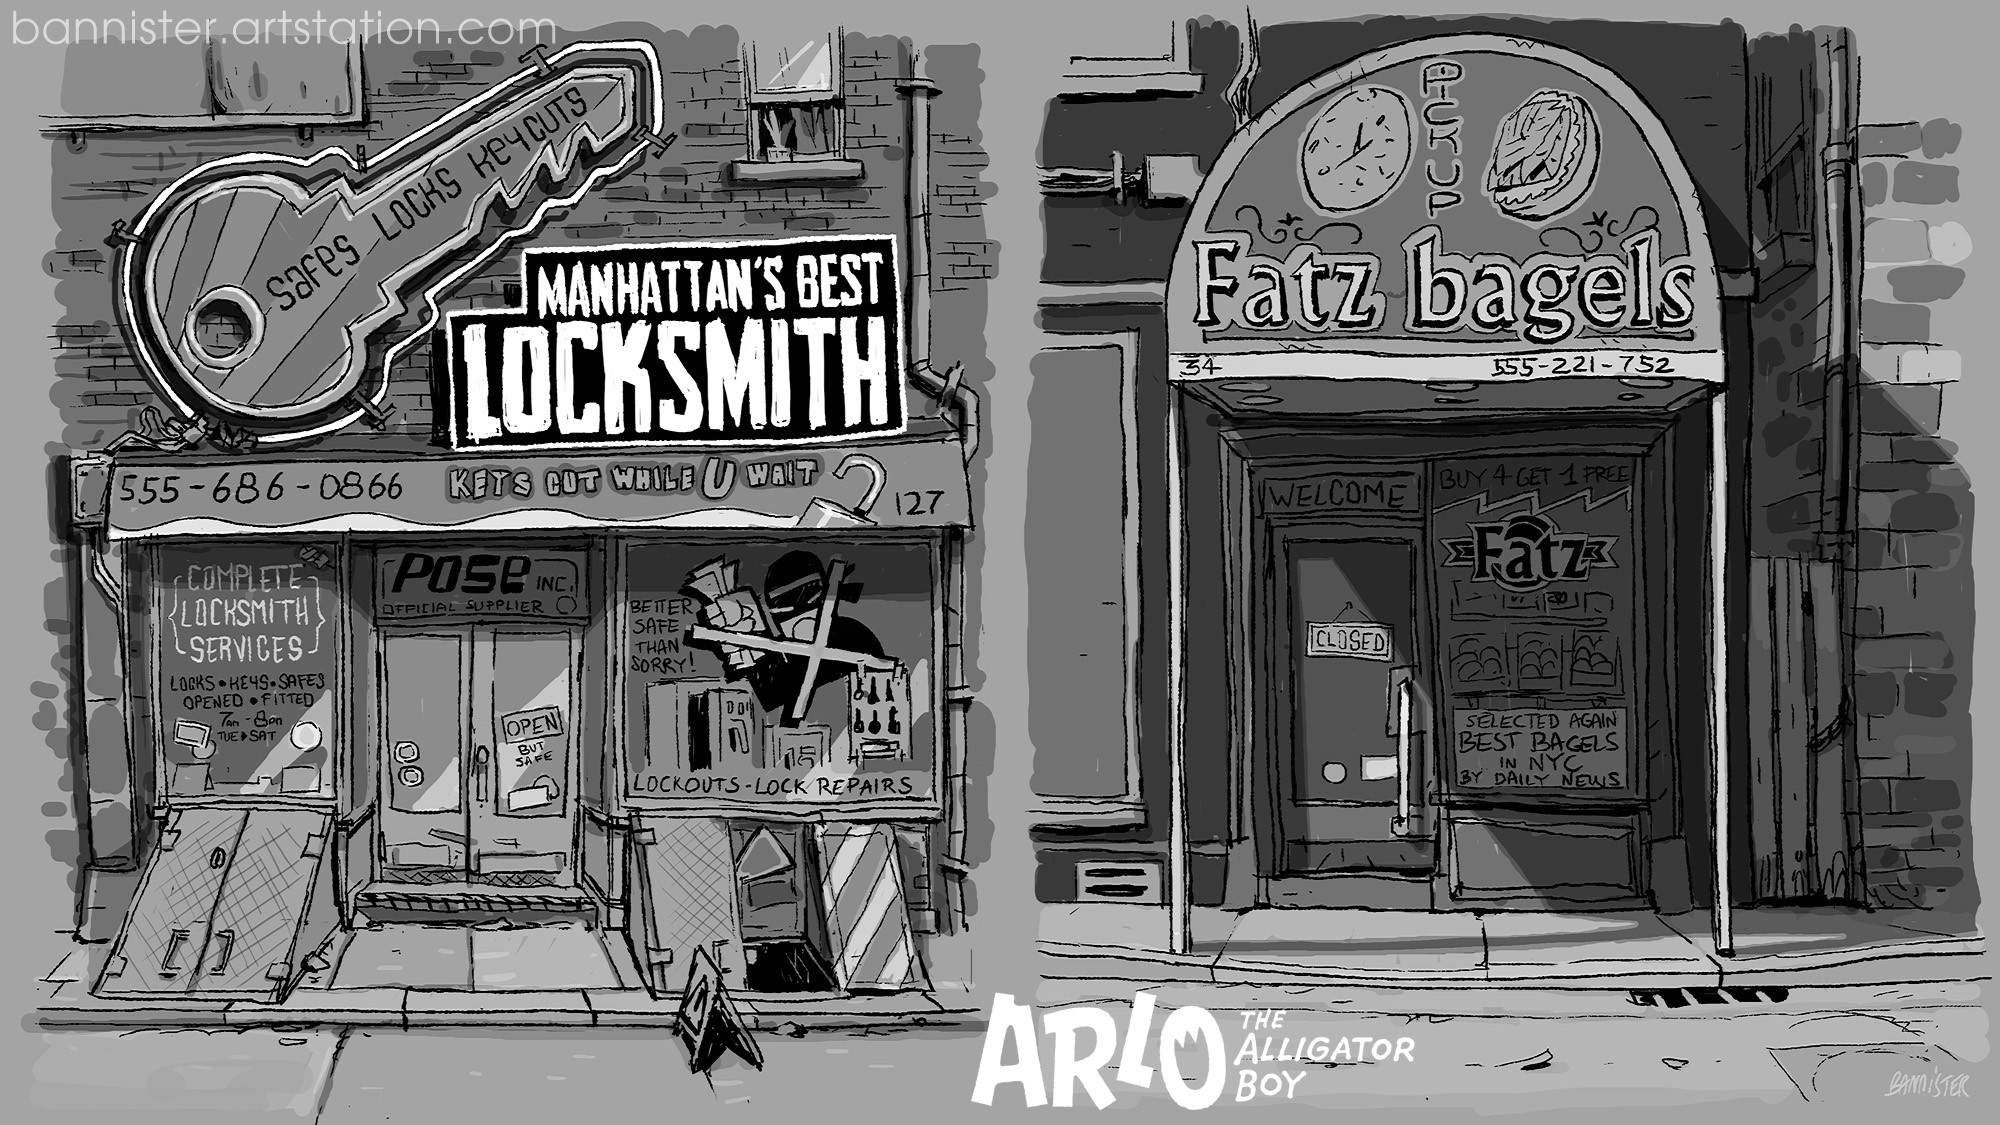 Old school Locksmith storefront and the uber famous NYC Fatz Bagels shop front,
tiny hidden bagel shop way down on 34thW.
Who's up for an everything with cream cheese and lox?